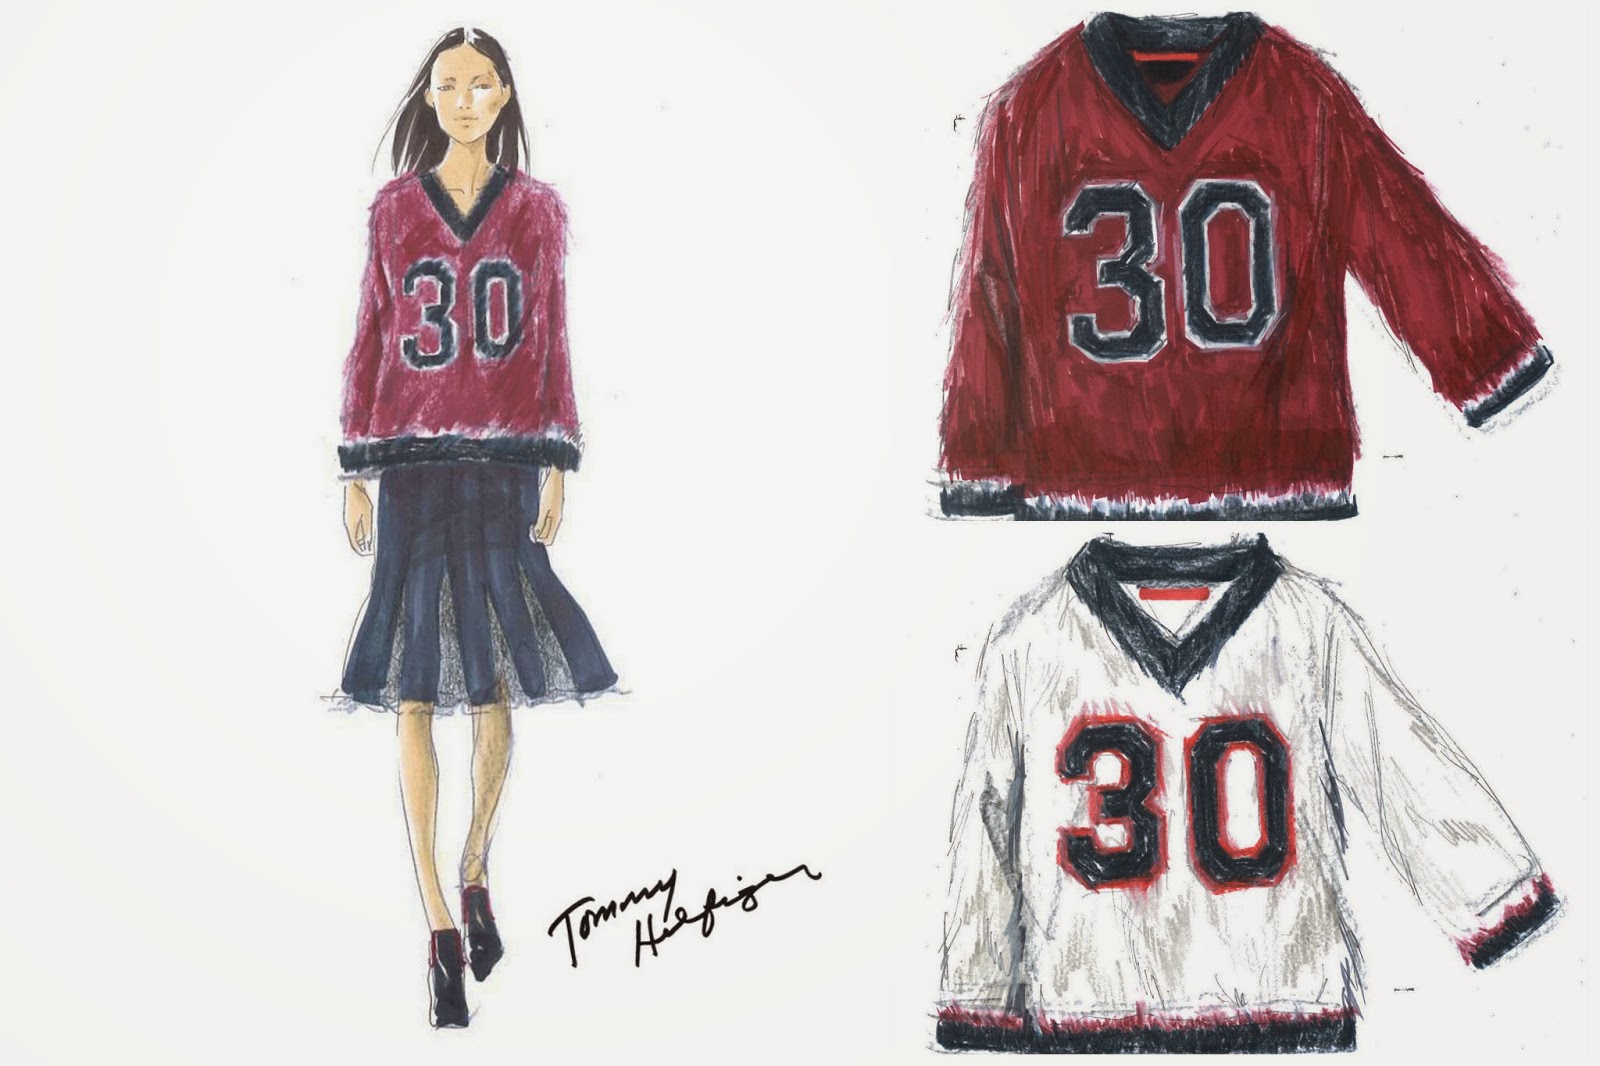 Tommy Hilfiger Limited-Edition Fall 2015 Designs Available Straight From the Runway to Celebrate 30th Anniversary